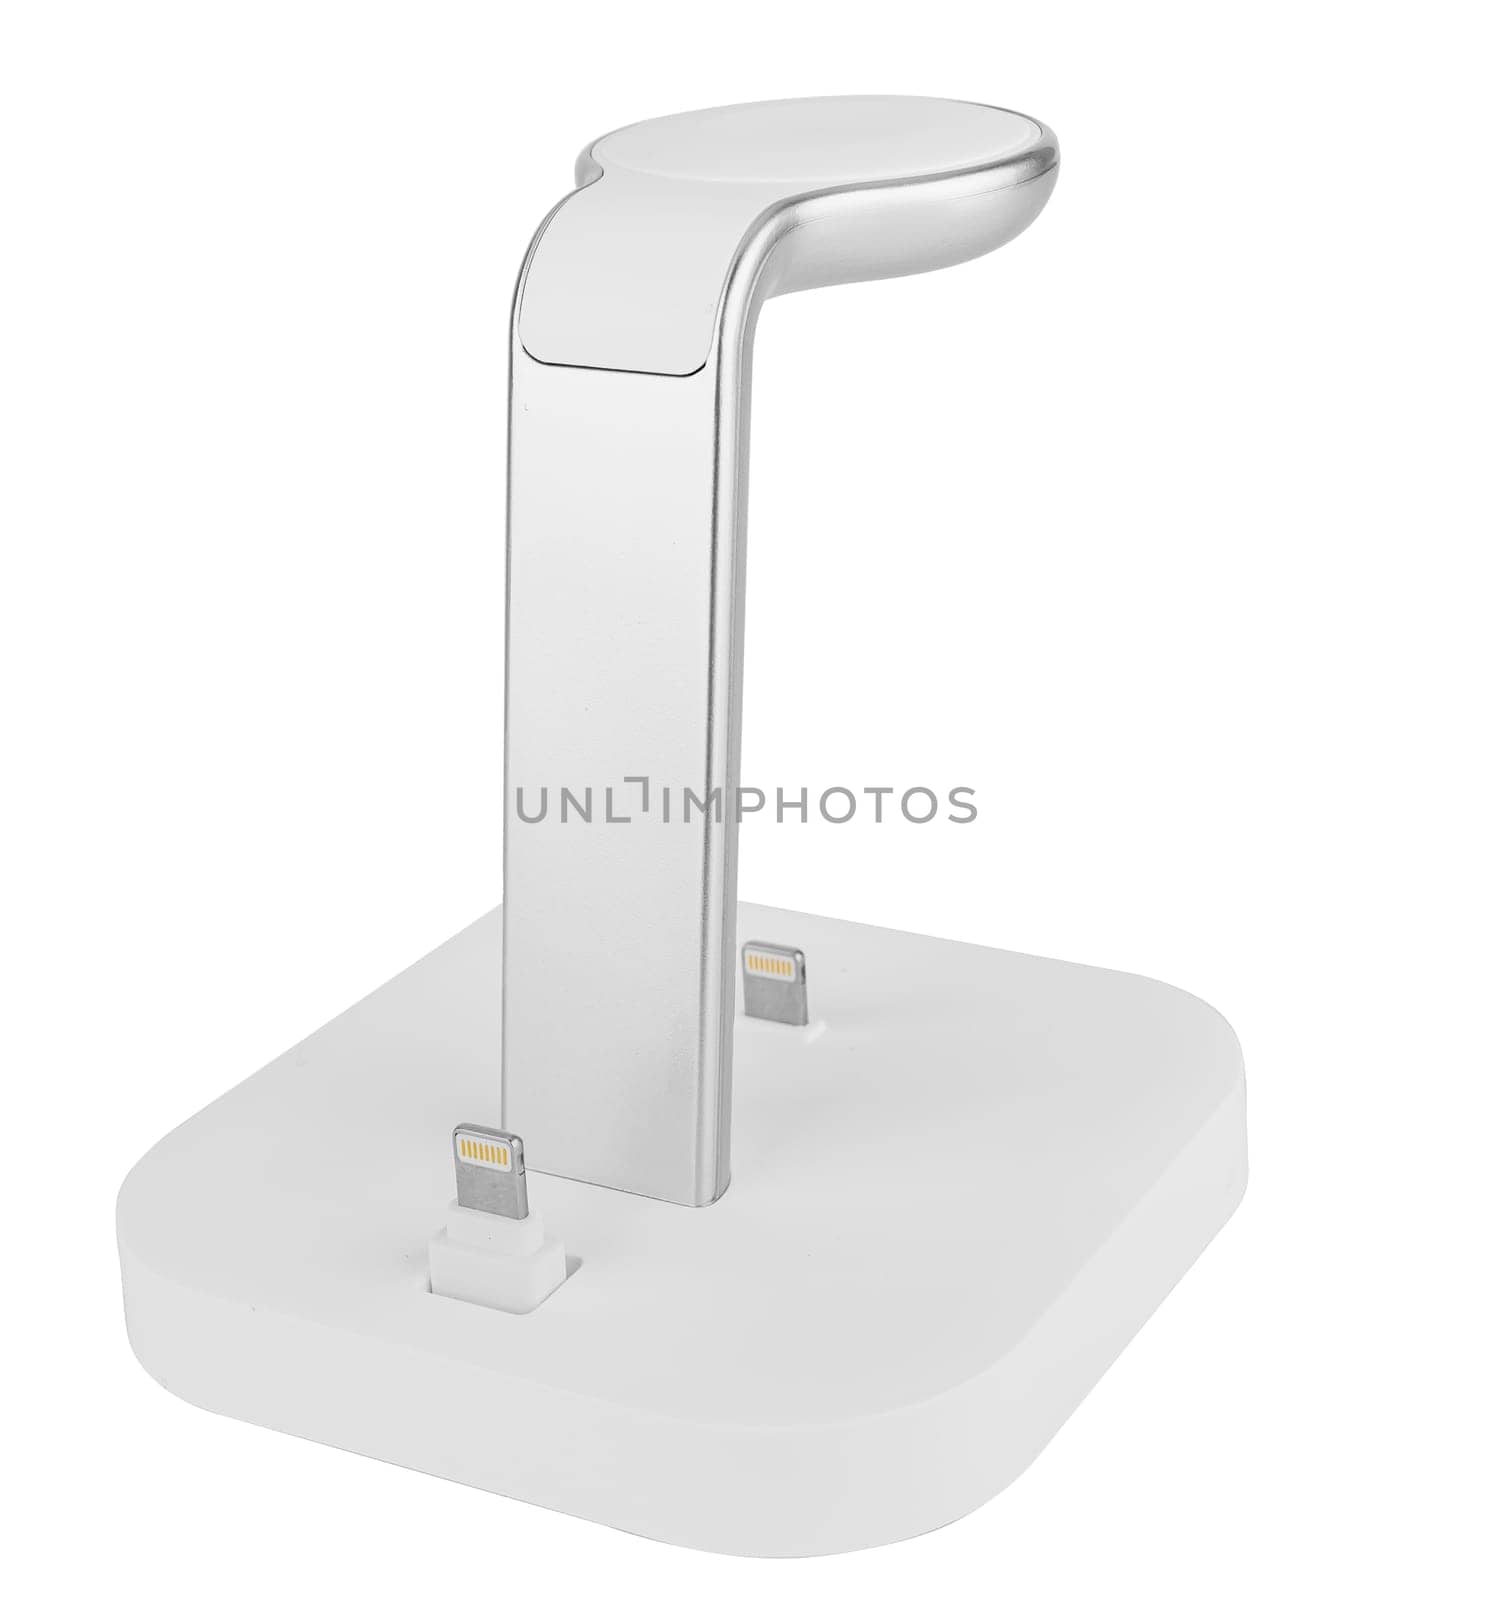 Wireless charging, in the form of a phone stand by A_A